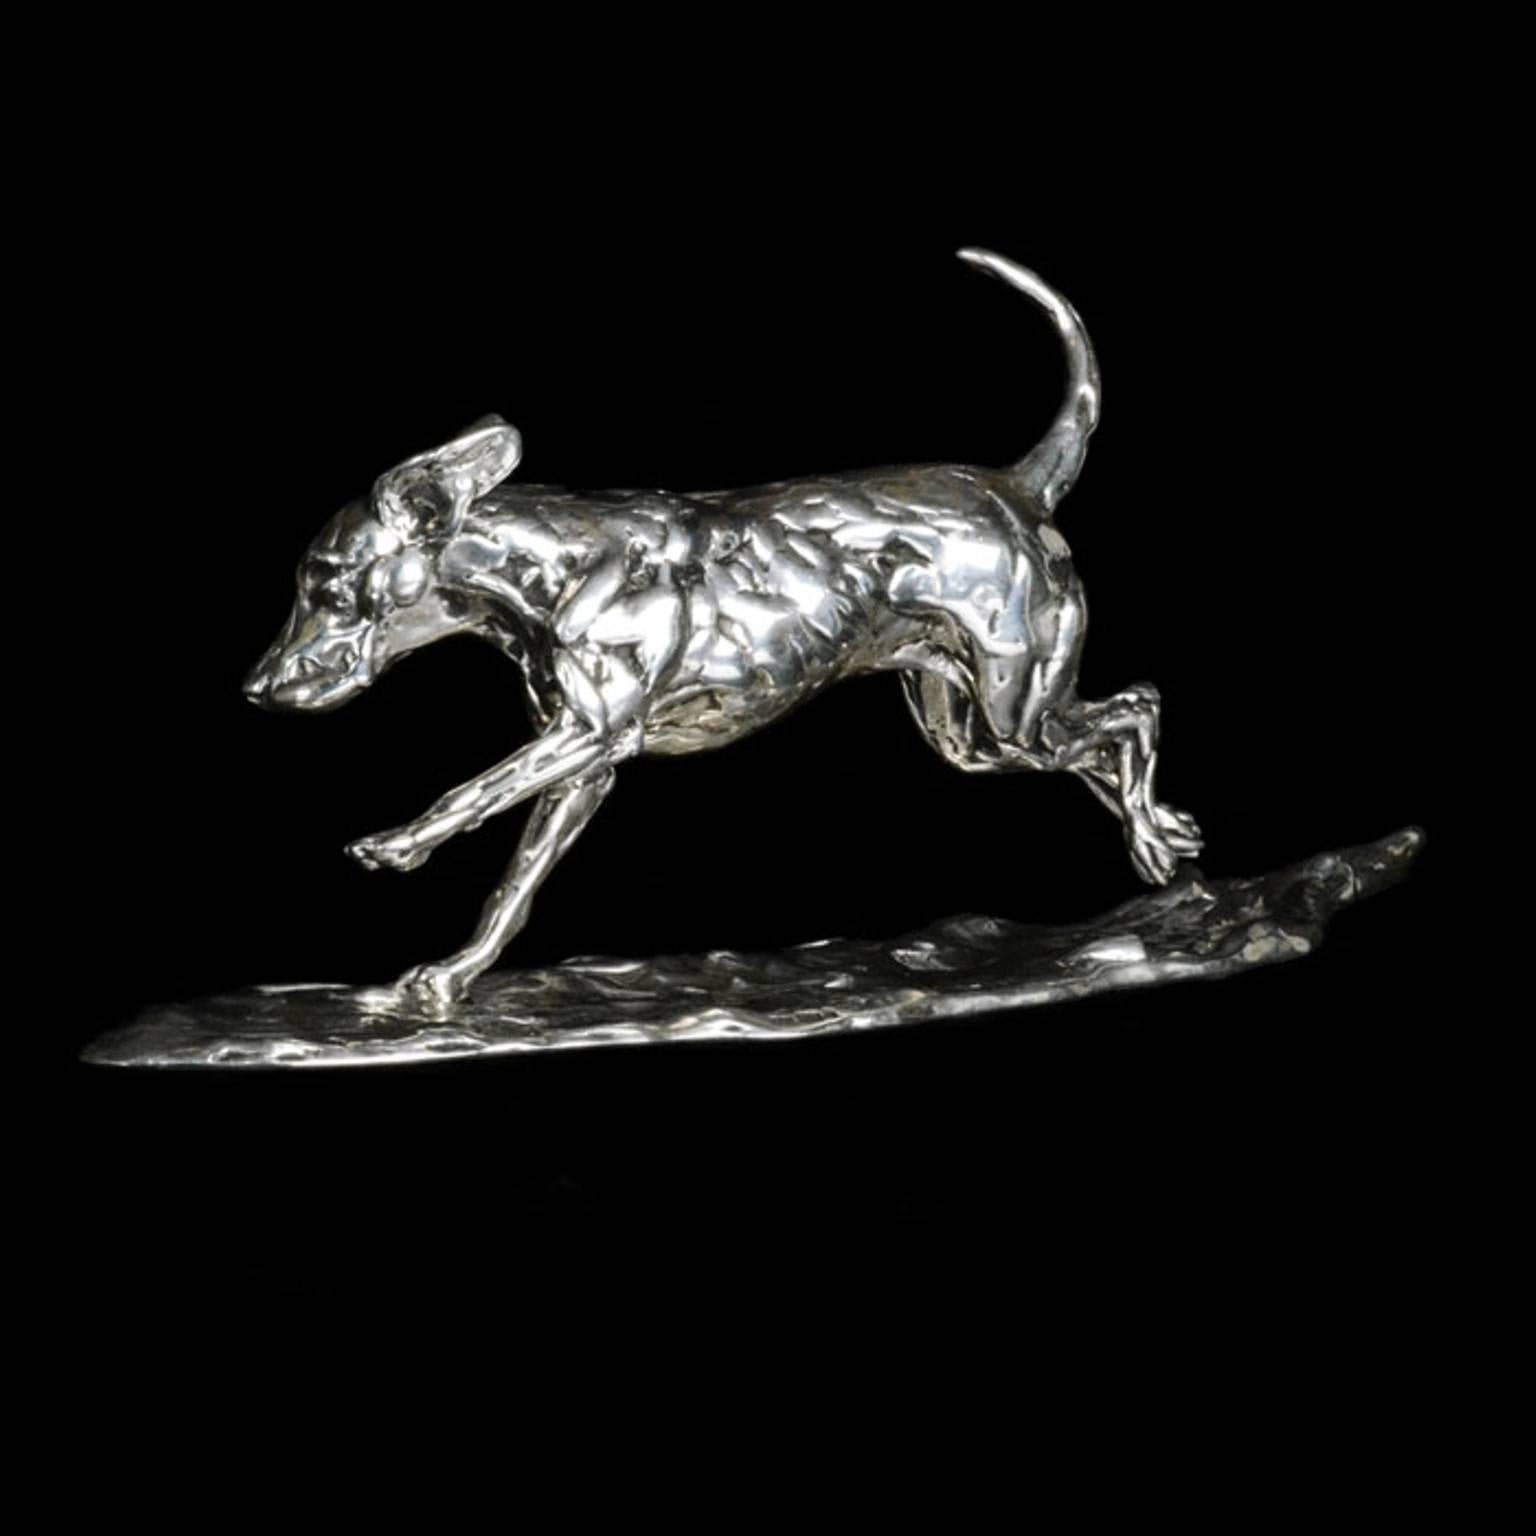  Lucy Kinsella  'Running Hound' sterling silver sculpture  1